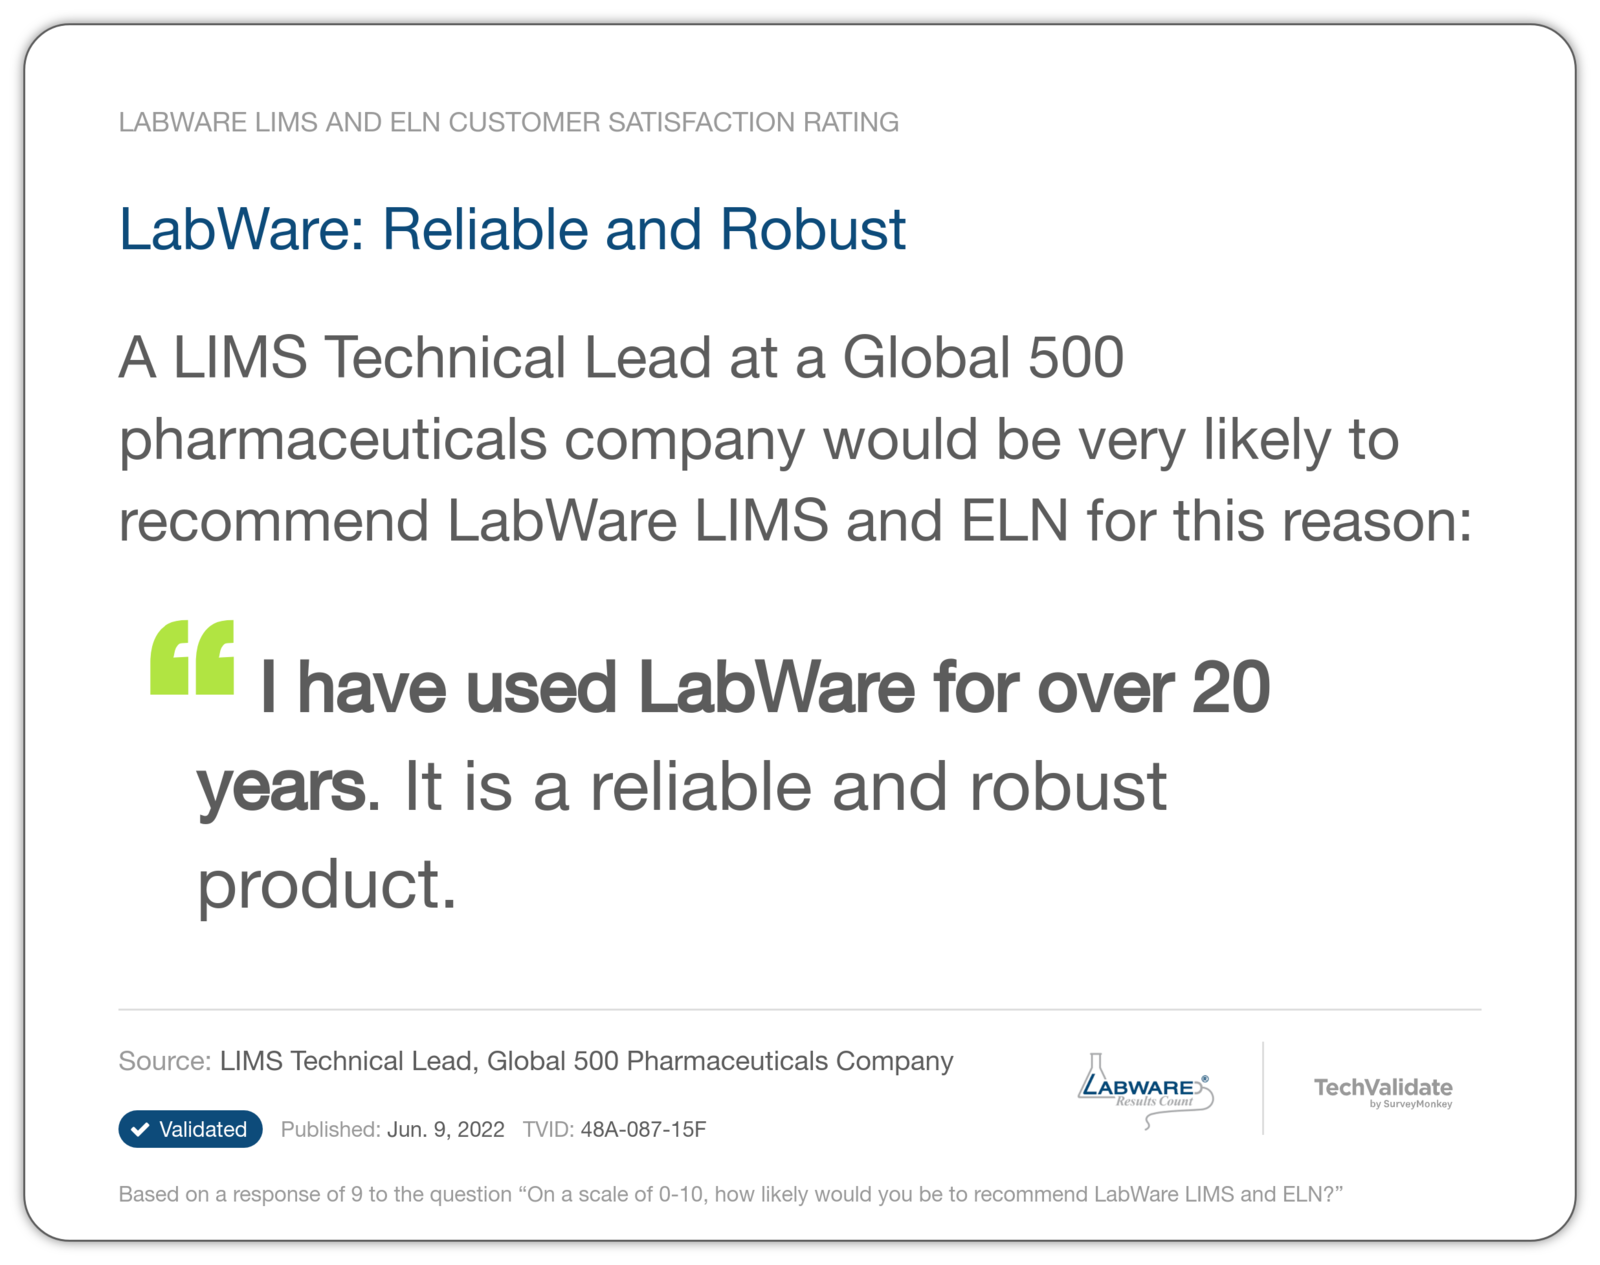 LabWare: Reliable and Robust